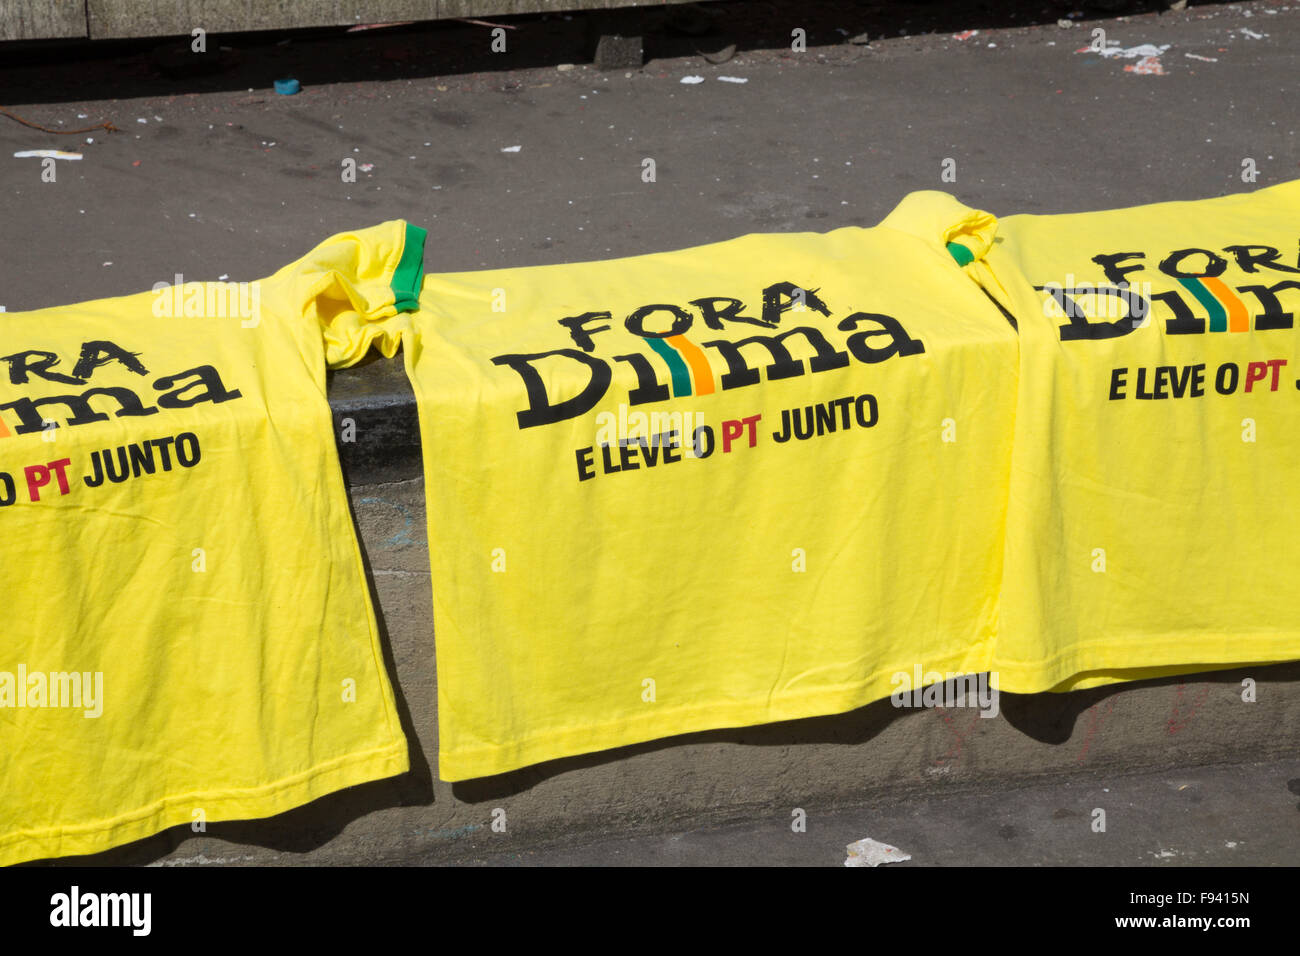 Sao Paulo, Brazil. 13th December, 2015. T-shirts written in Portuguese 'Fora Dilma e leve o PT junto' (in English 'Go Out Dilma and take the PT together') are seen during a demonstration calling for the impeachment of Brazil's President Dilma Rousseff in Paulista avenue, Sao Paulo, Brazil. Credit: Andre M. Chang/Alamy Live News Stock Photo